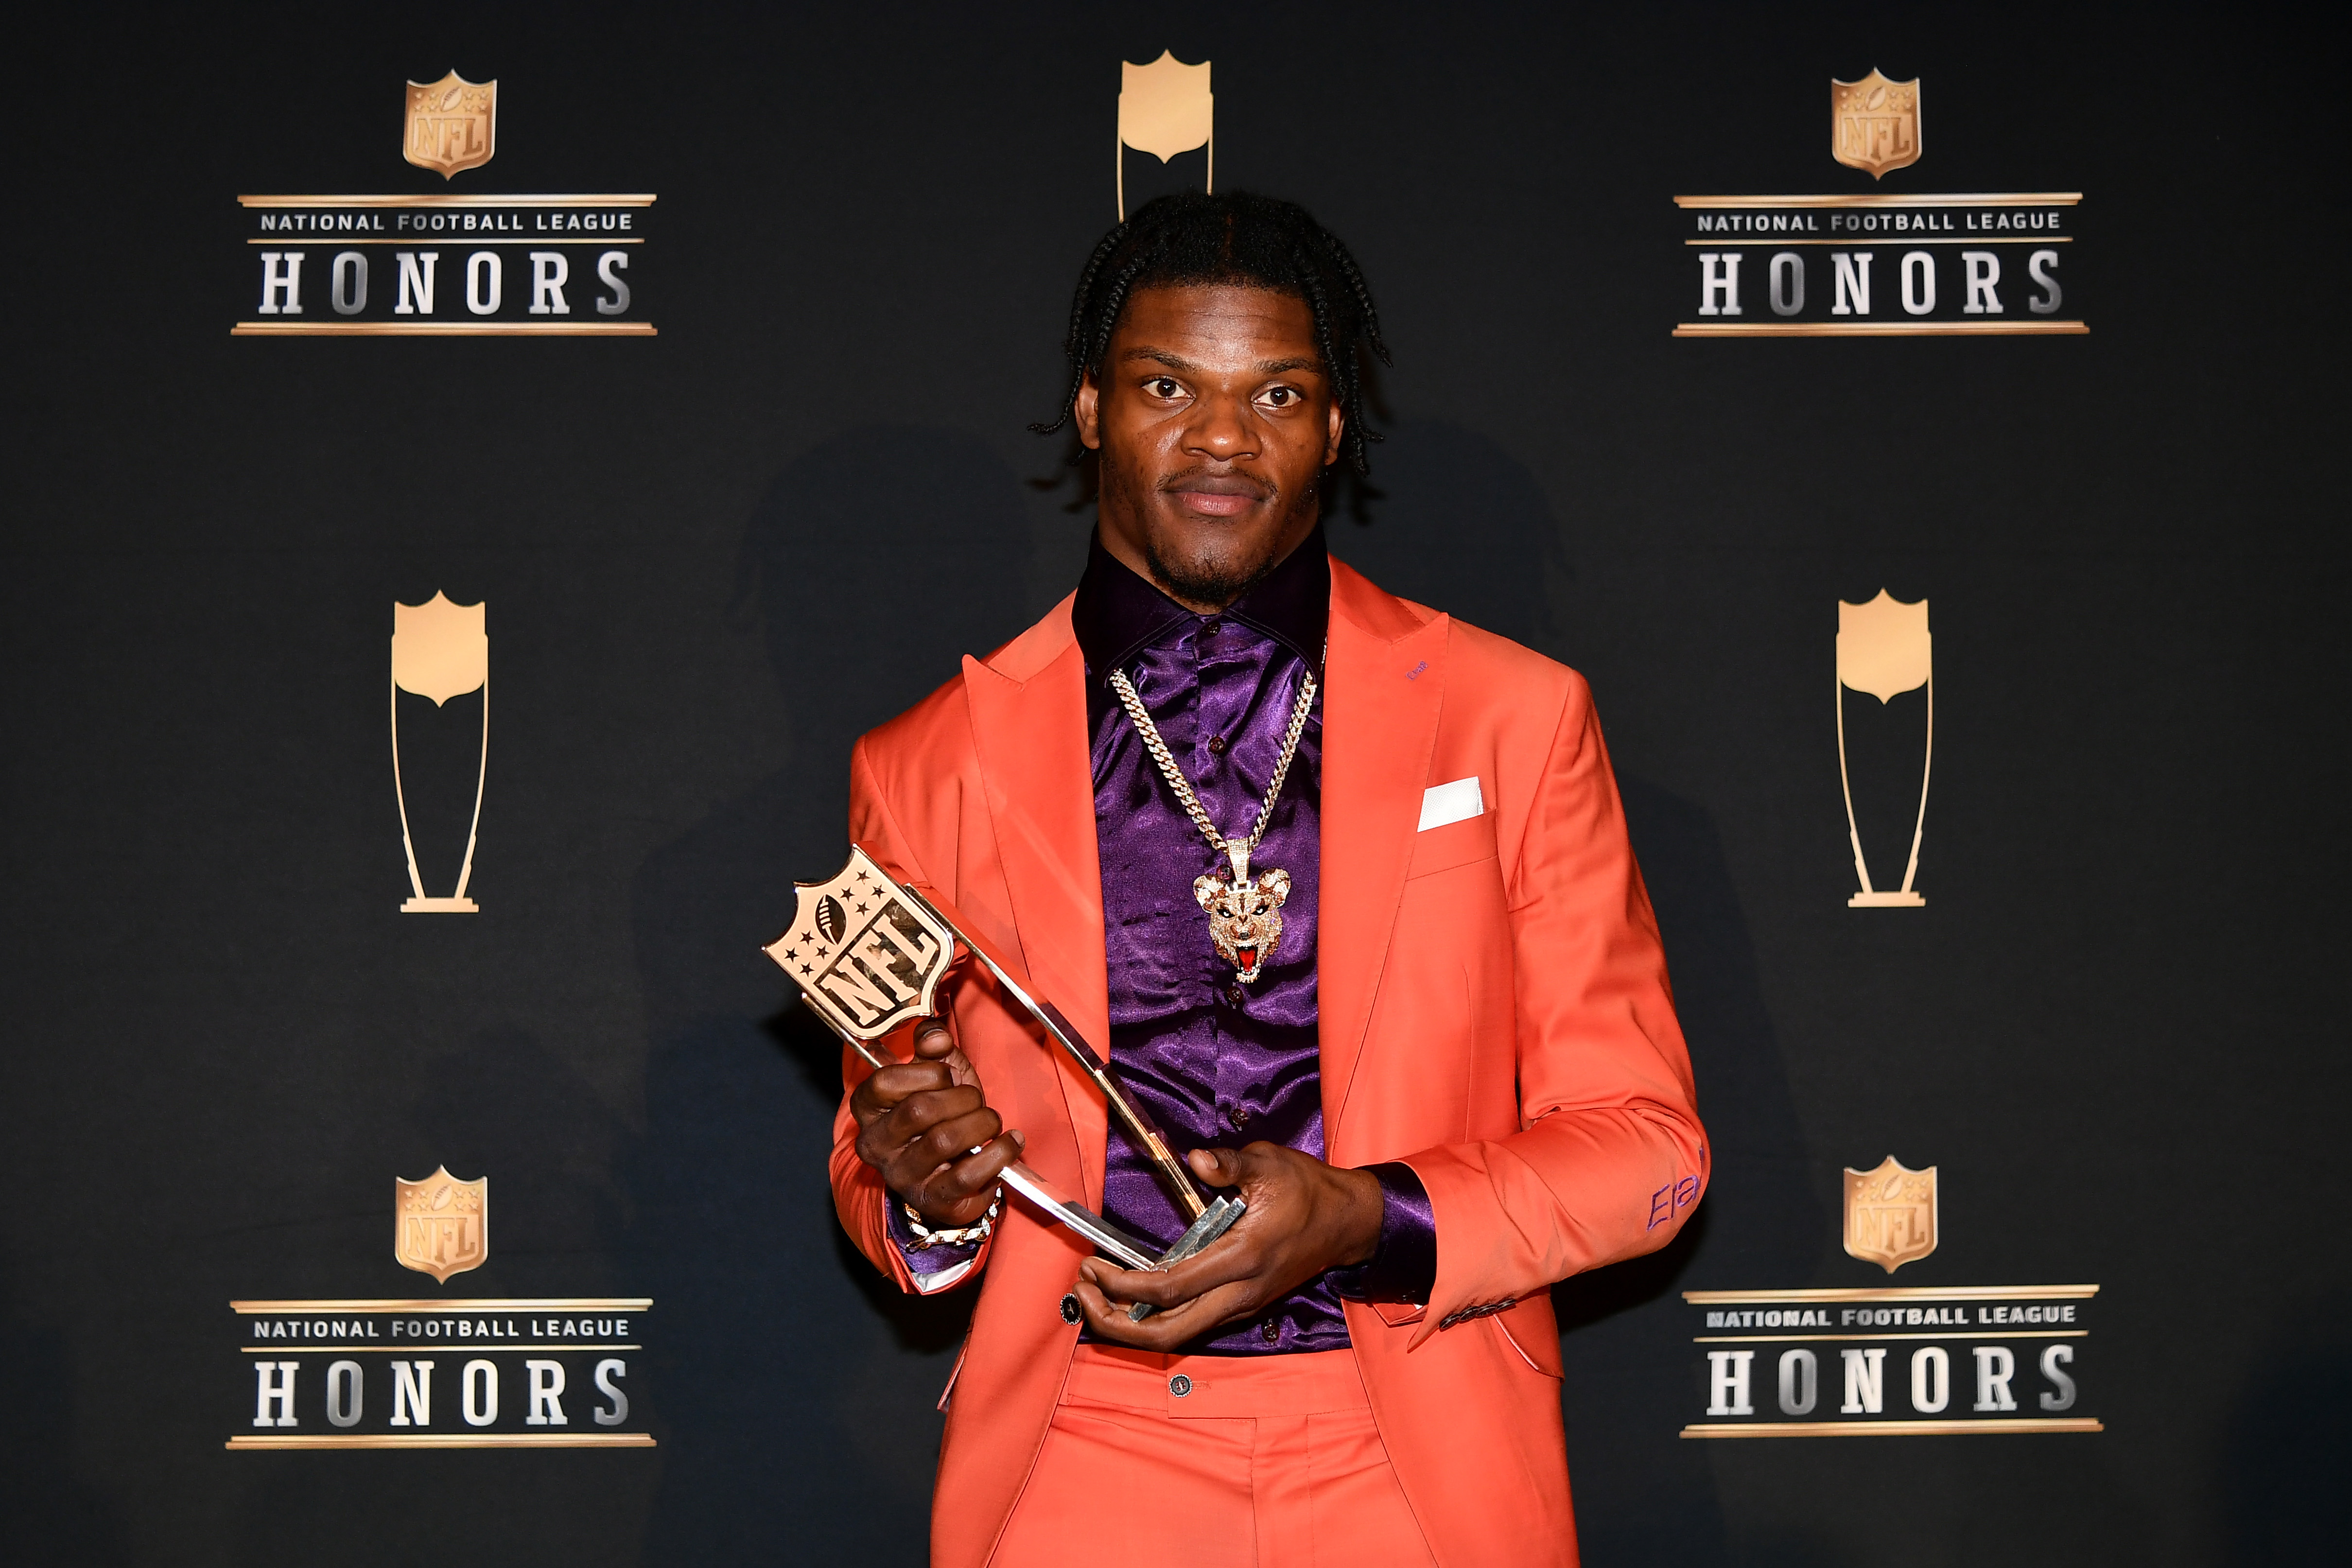 Jackson Named NFL MVP By Unanimous Vote